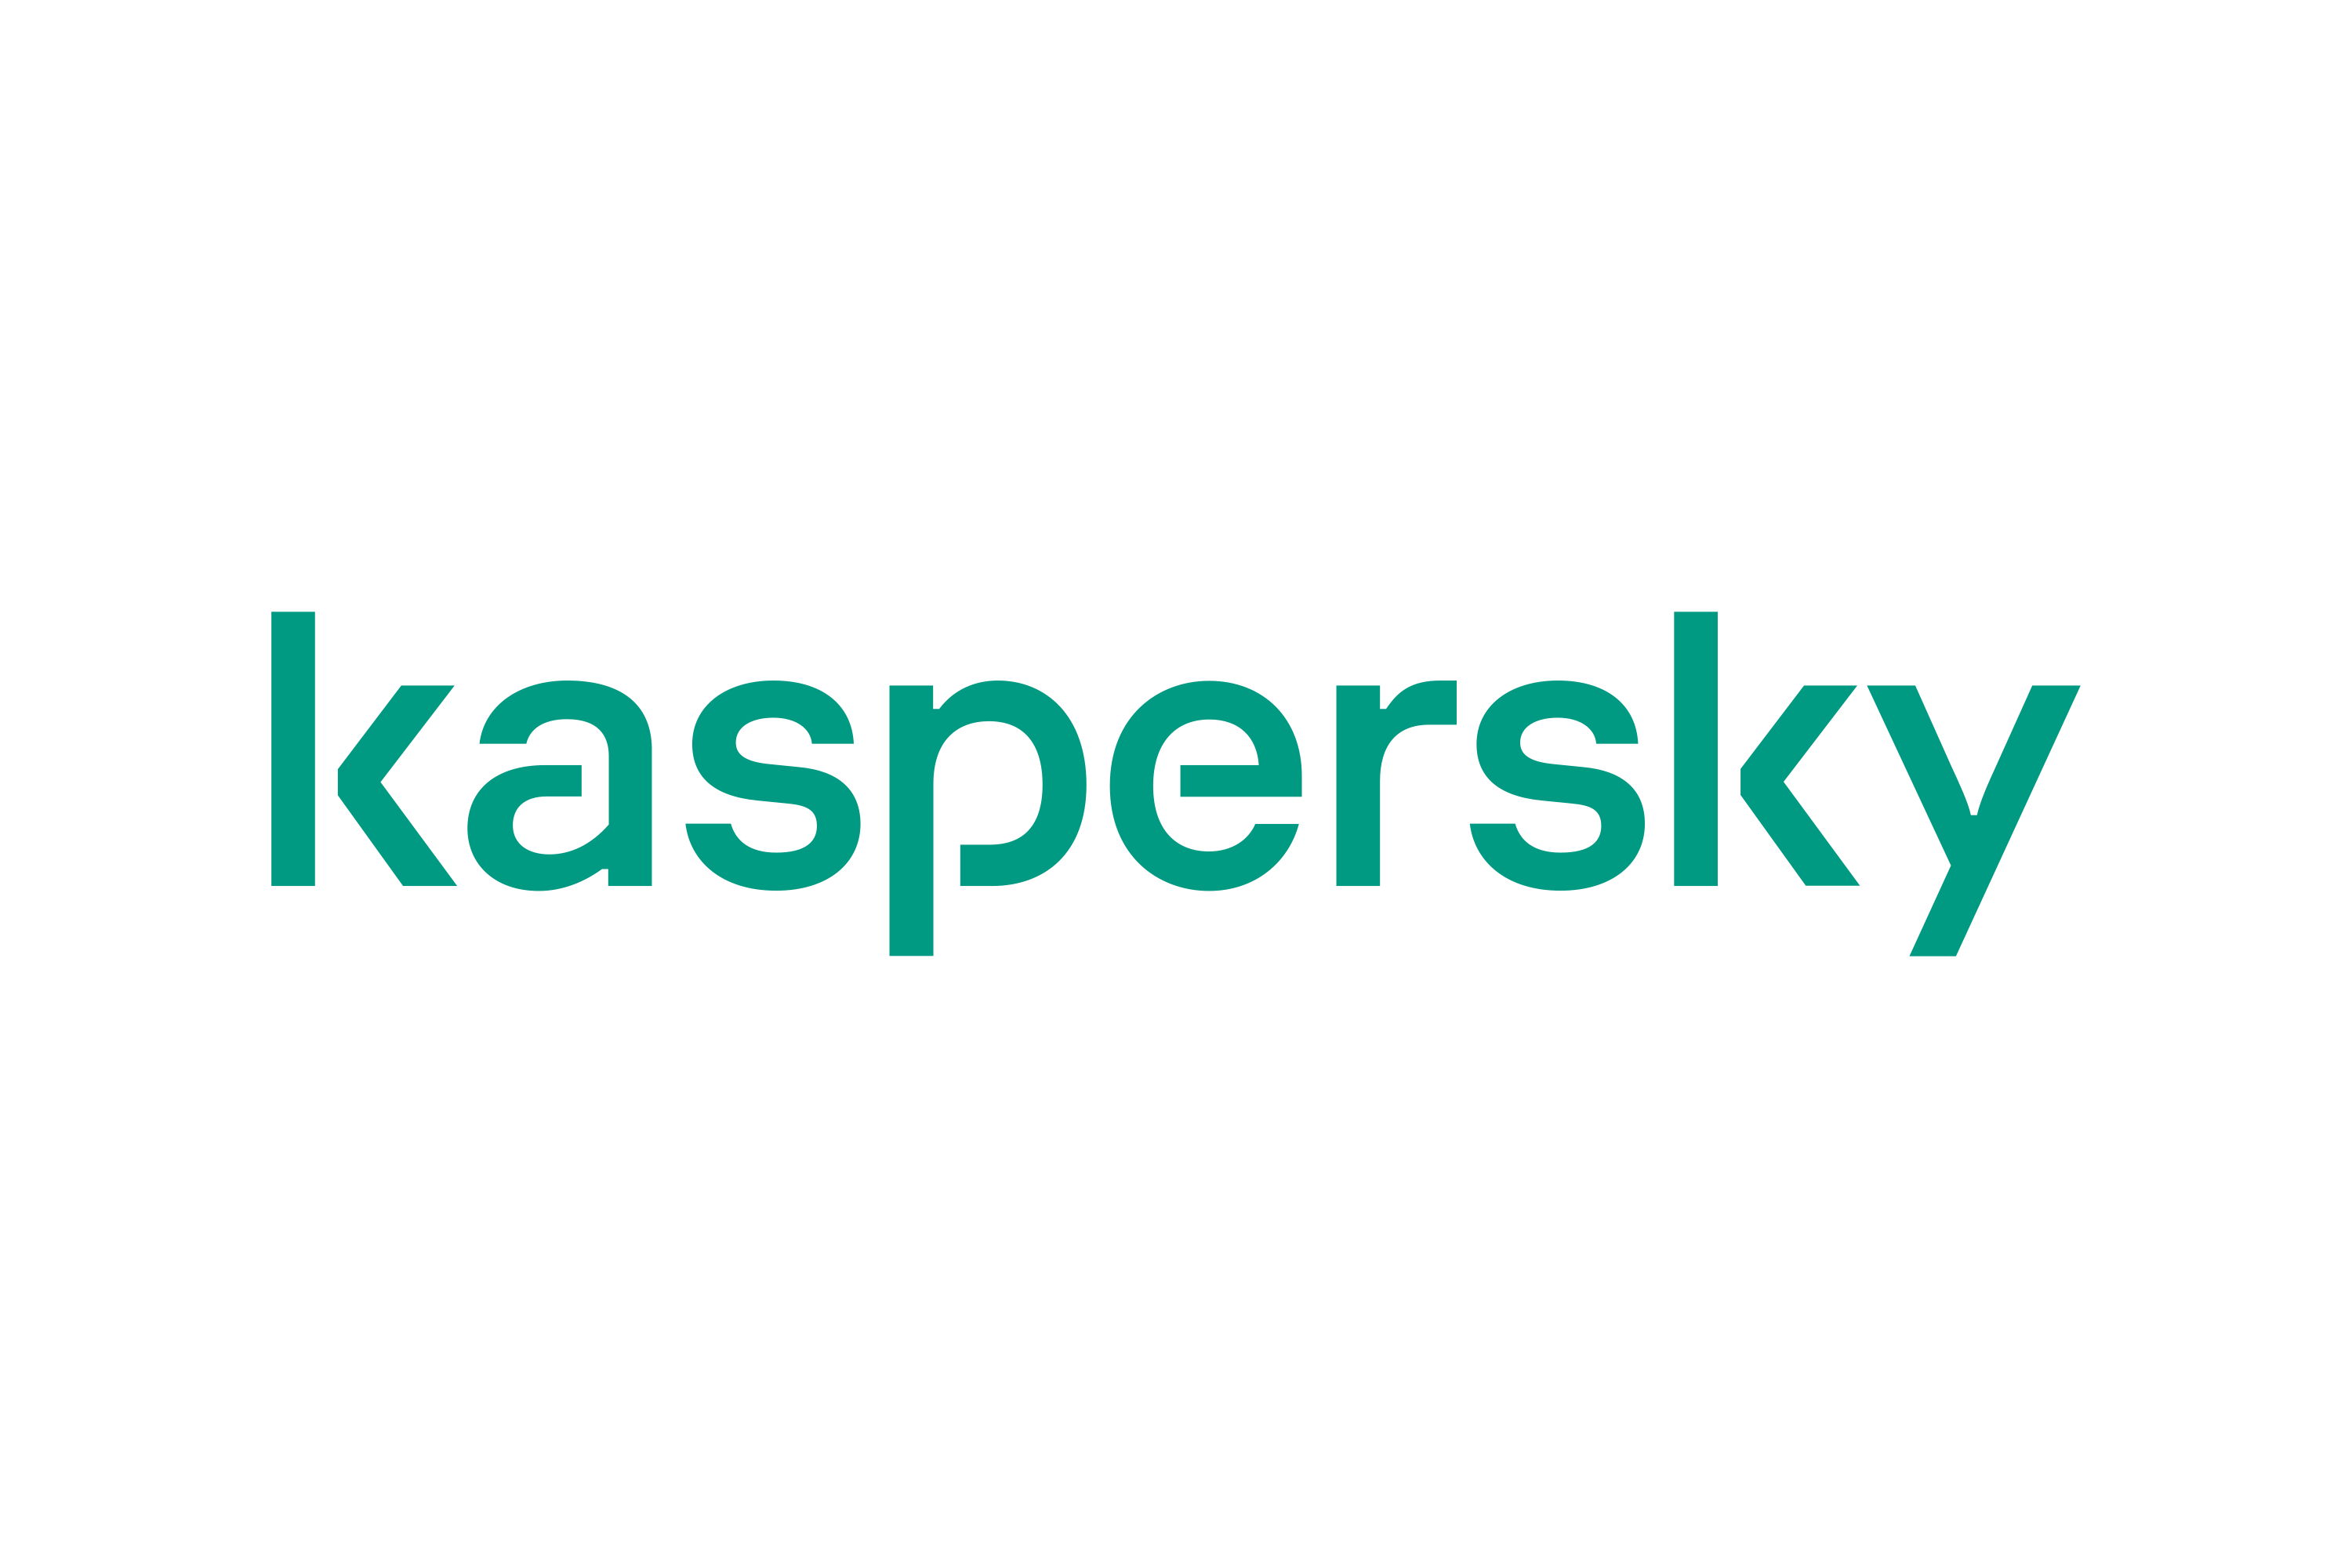 Malaysia poised for economic benefits from IOT tech – Kaspersky